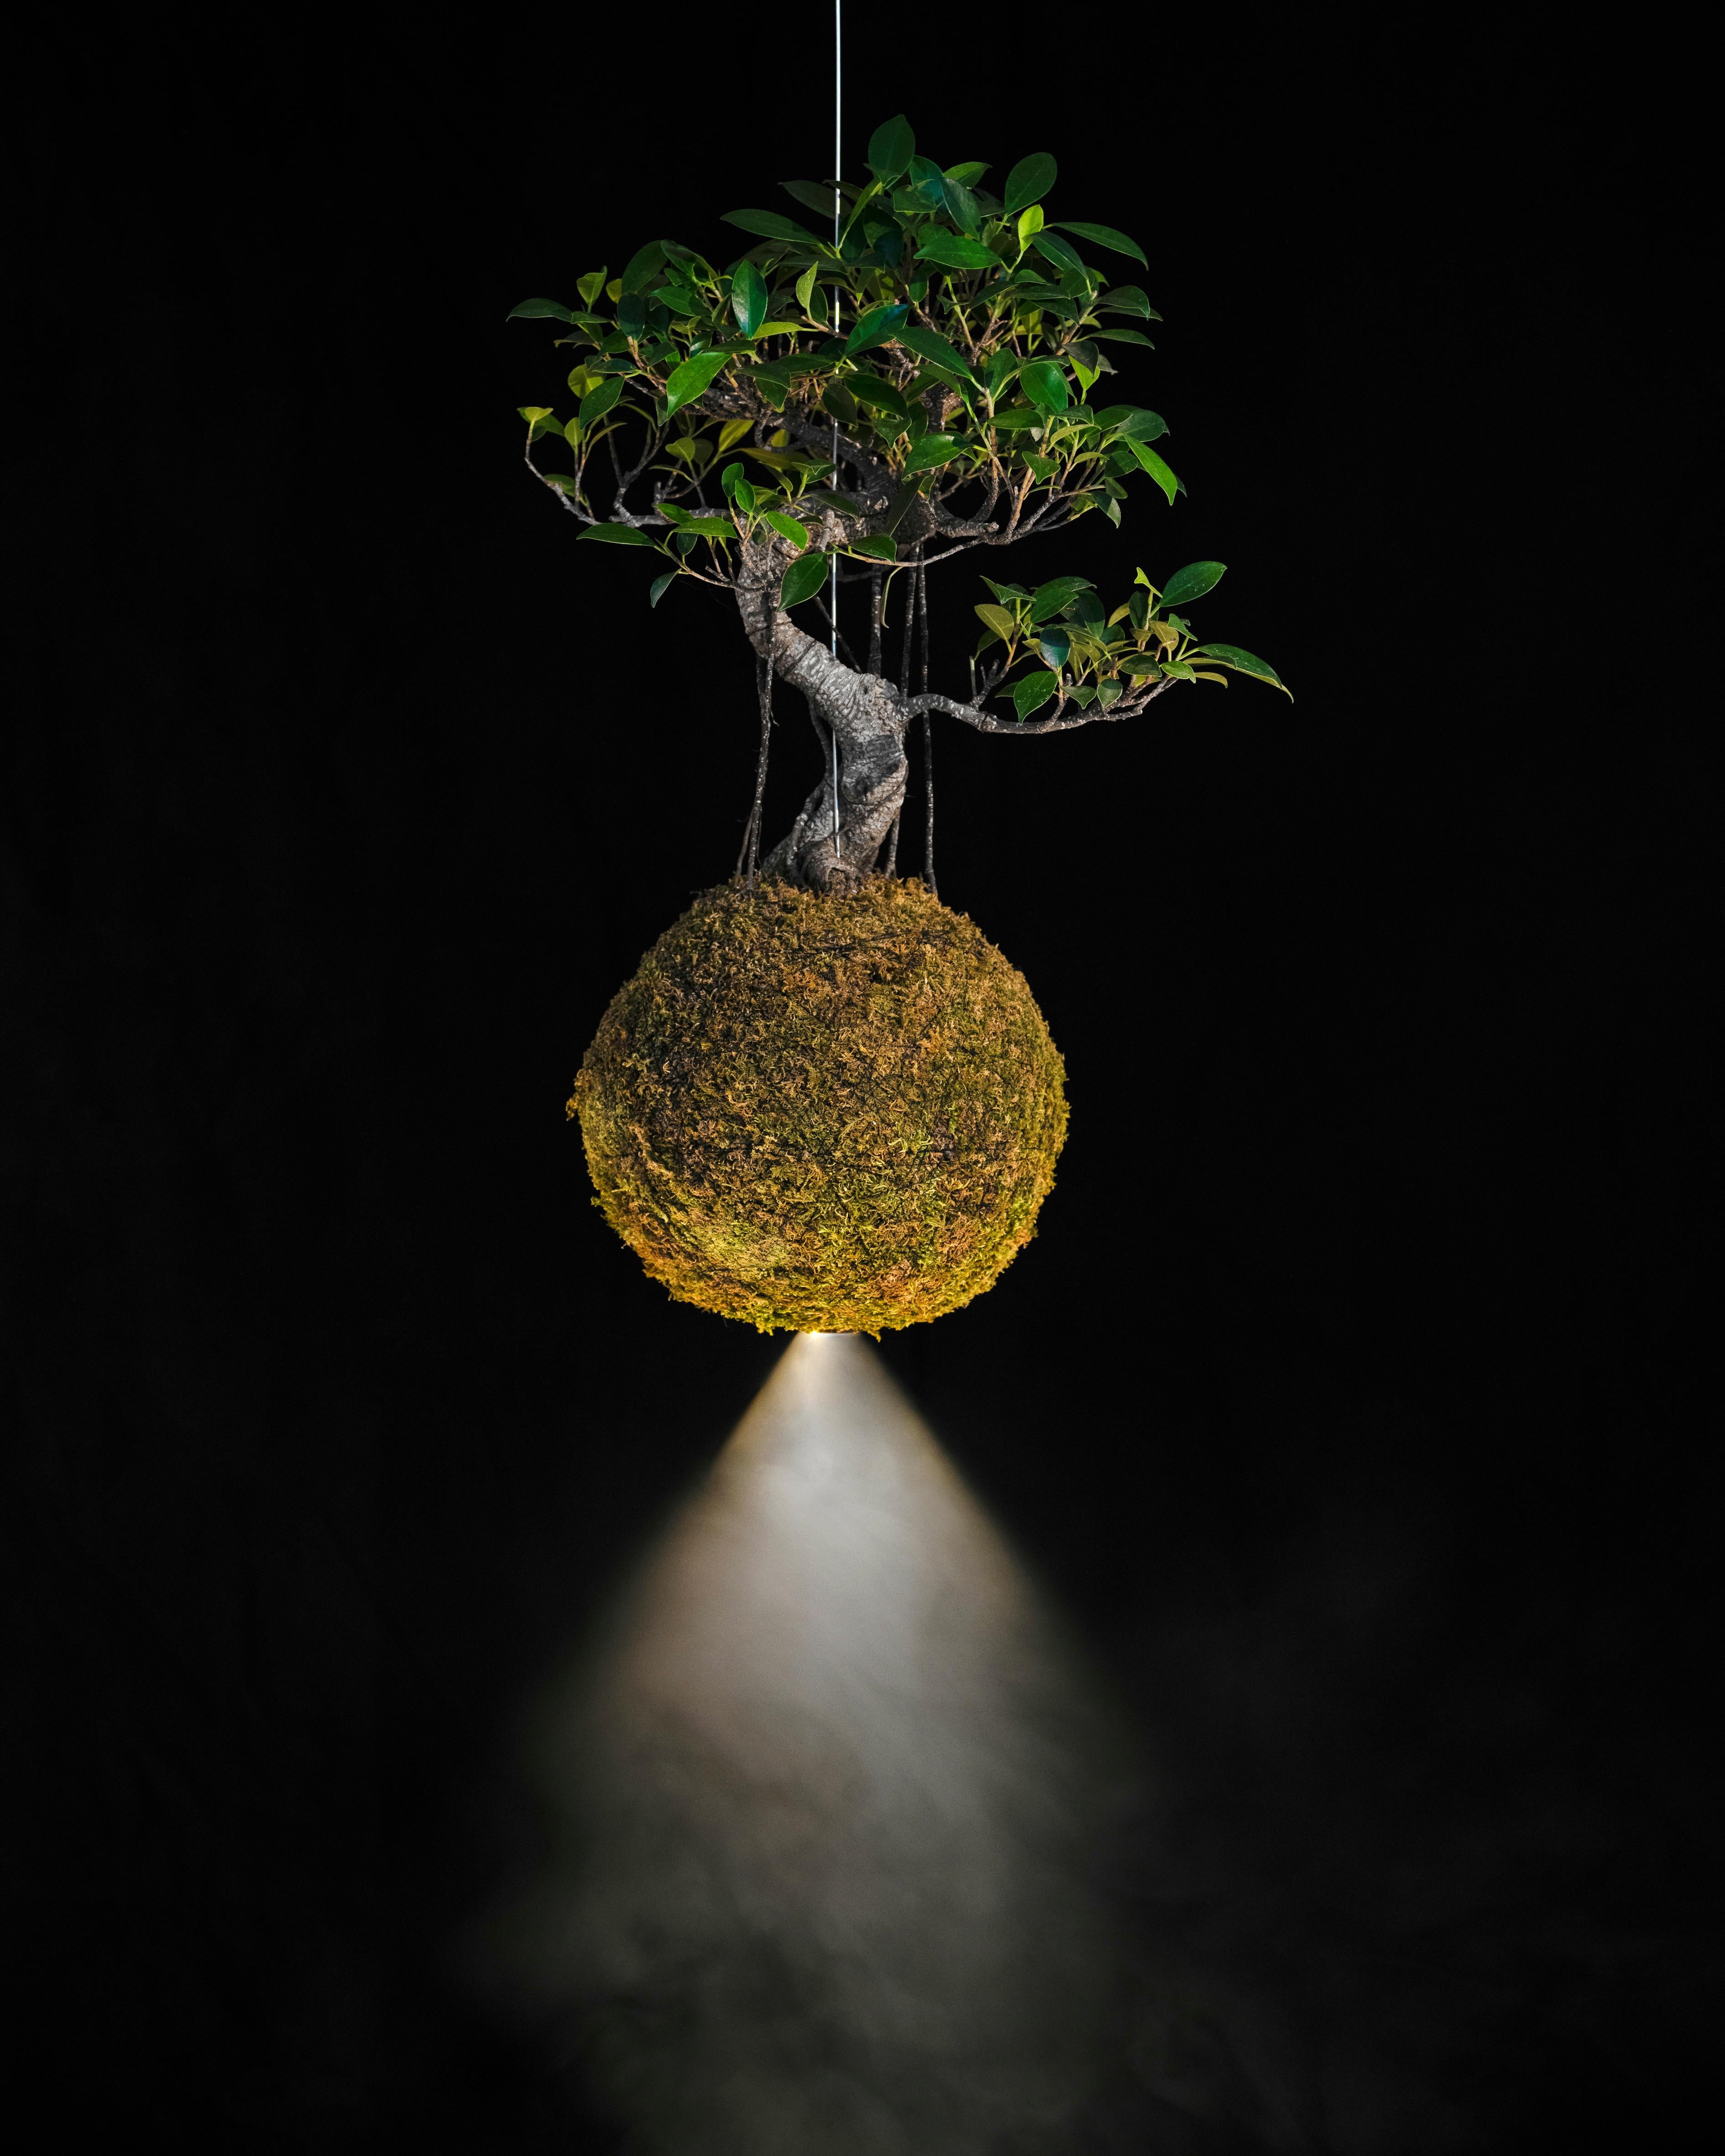 Halo Leaf suspension lamp by Mandalaki
Dimensions: D 2.8 x H 14.5 cm
Materials: Aluminium, brass, iron
Plant: Bonsai di Ficus Retusa
Also Available: Other model available on request.

Input: 5V
Lumen: ~ 30lm - 100lm - 250lm - 500lm
Light